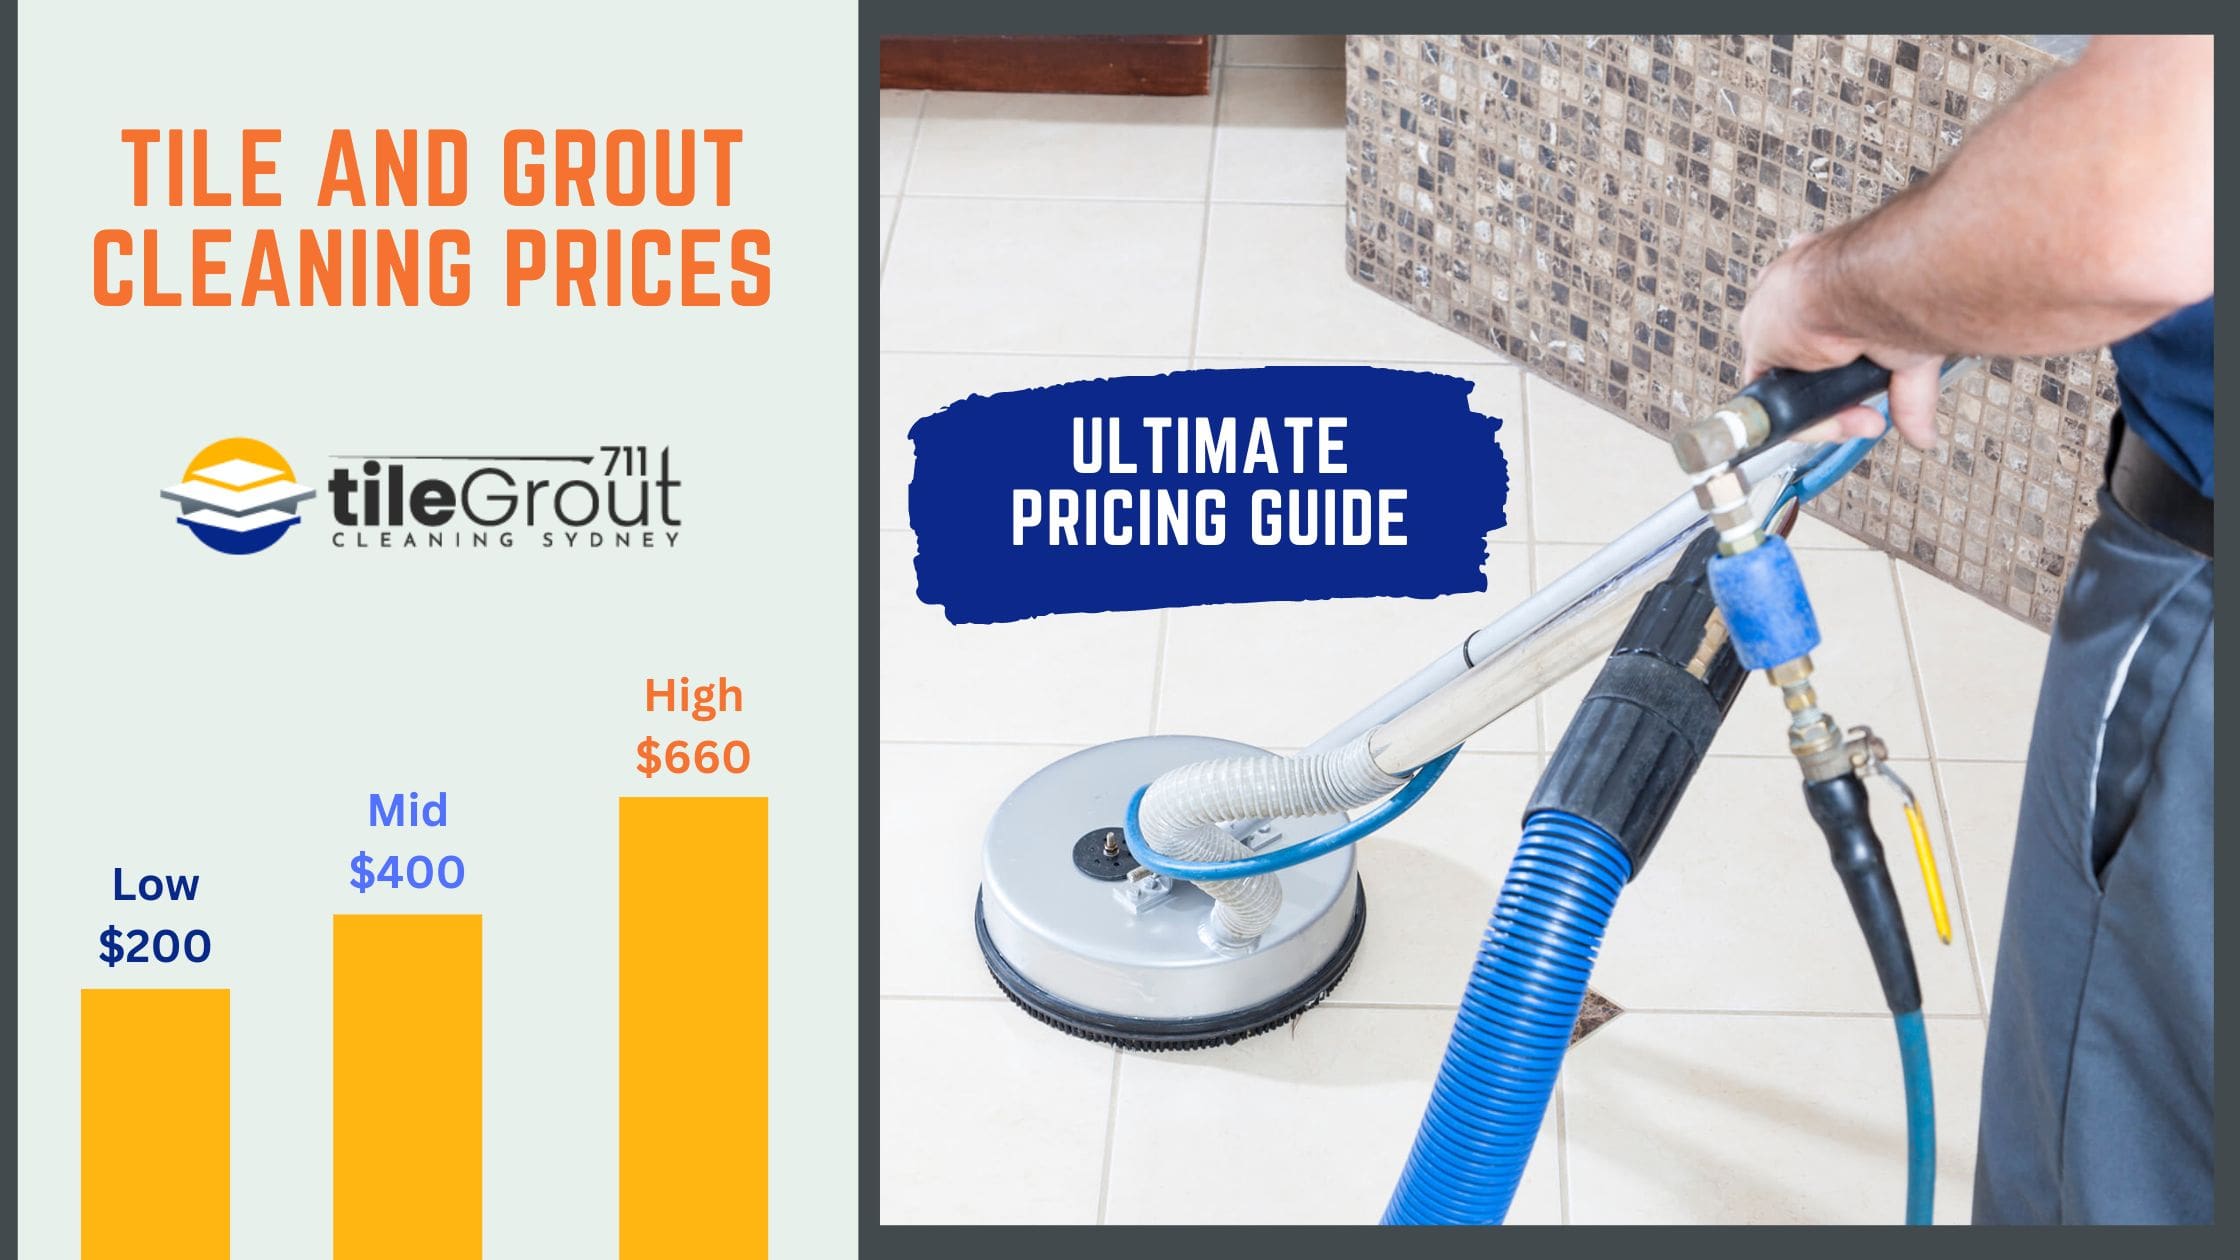 Tile and Grout Cleaning Prices How Much Does It Cost in Sydney